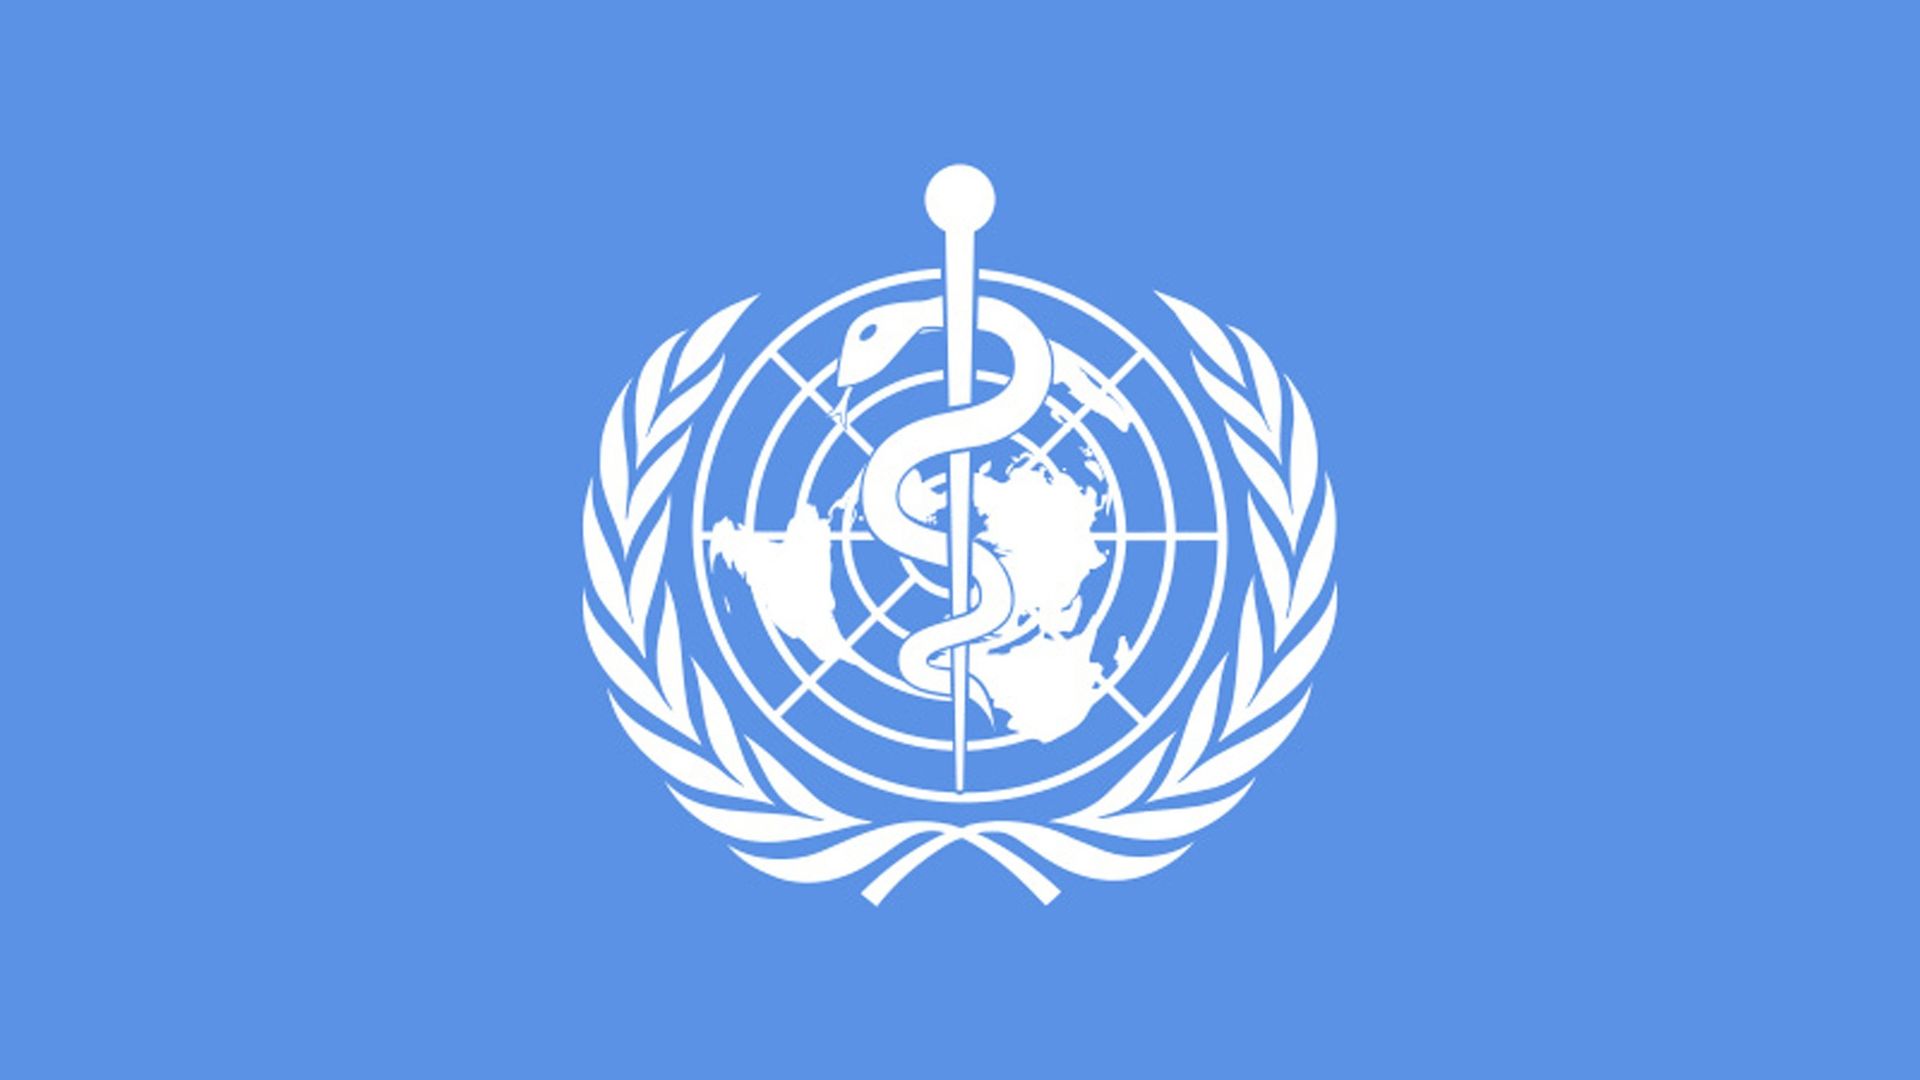 The white logo of the World Health Organization on an azure background.